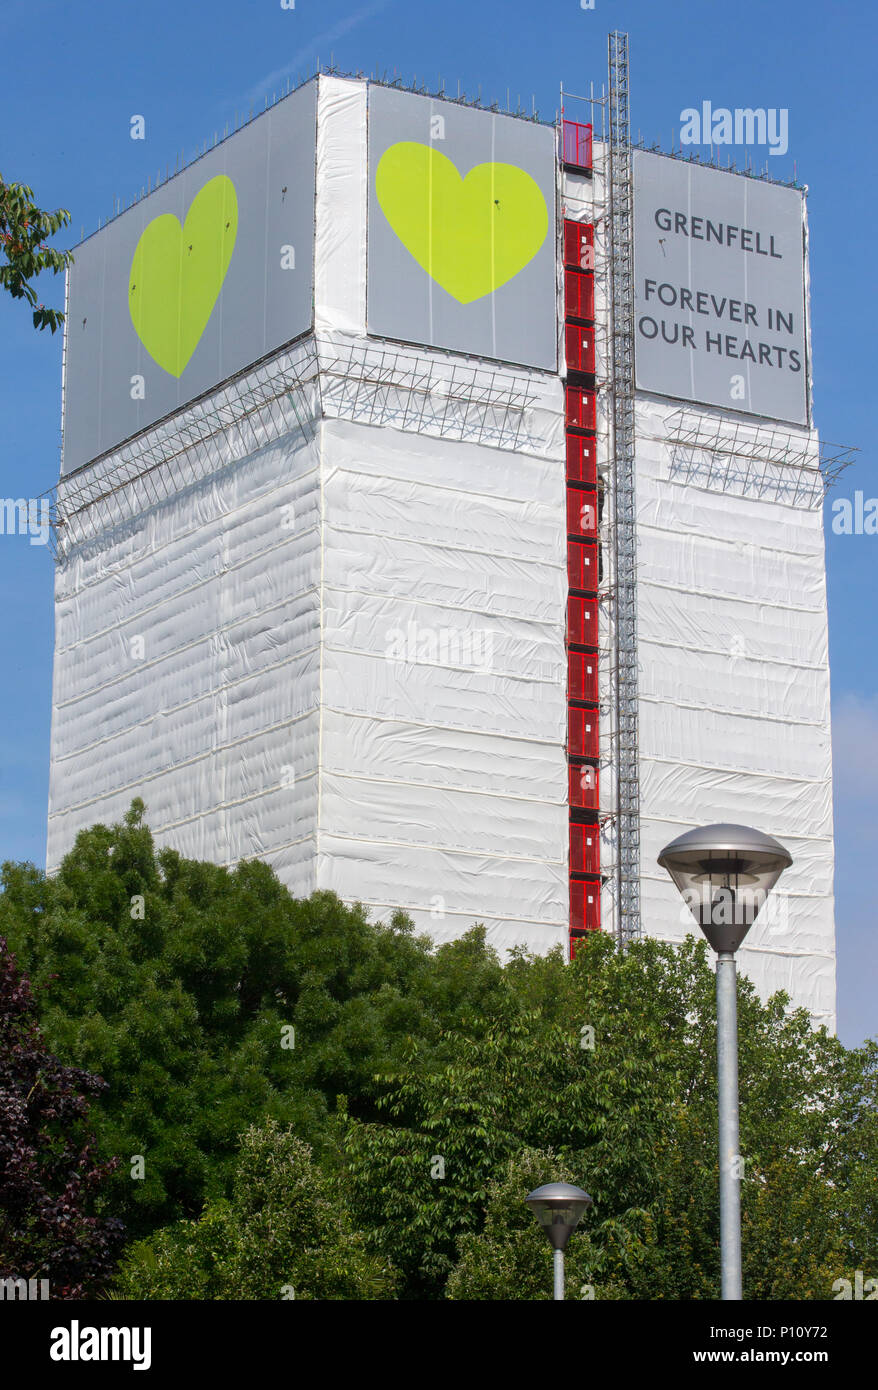 Grenfell Tower where at least 72 people died after a fire broke out on June 14th 2017 in North Kensington with the slogan 'Forever in our Hearts'. Stock Photo